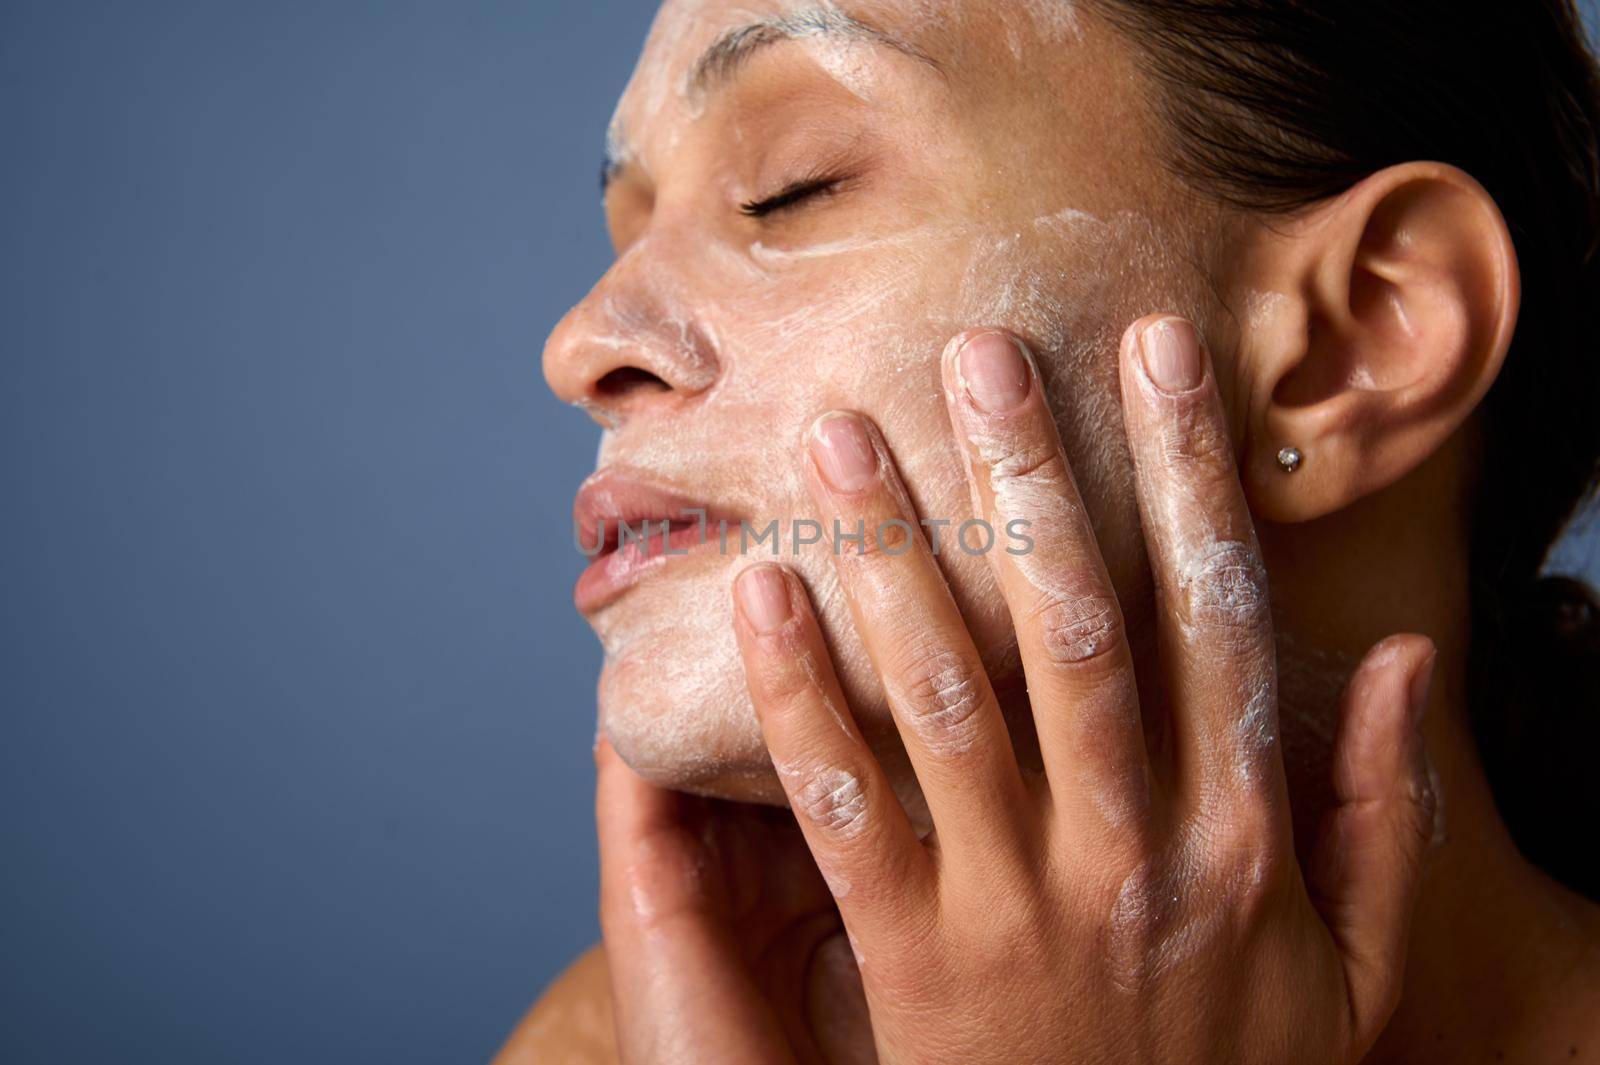 Head shot of beautiful woman with perfectly healthy skin, holding hands on her face, performing smoothing massage, removing makeup and cleansing face with exfoliating scrub and facial foam cleanser by artgf